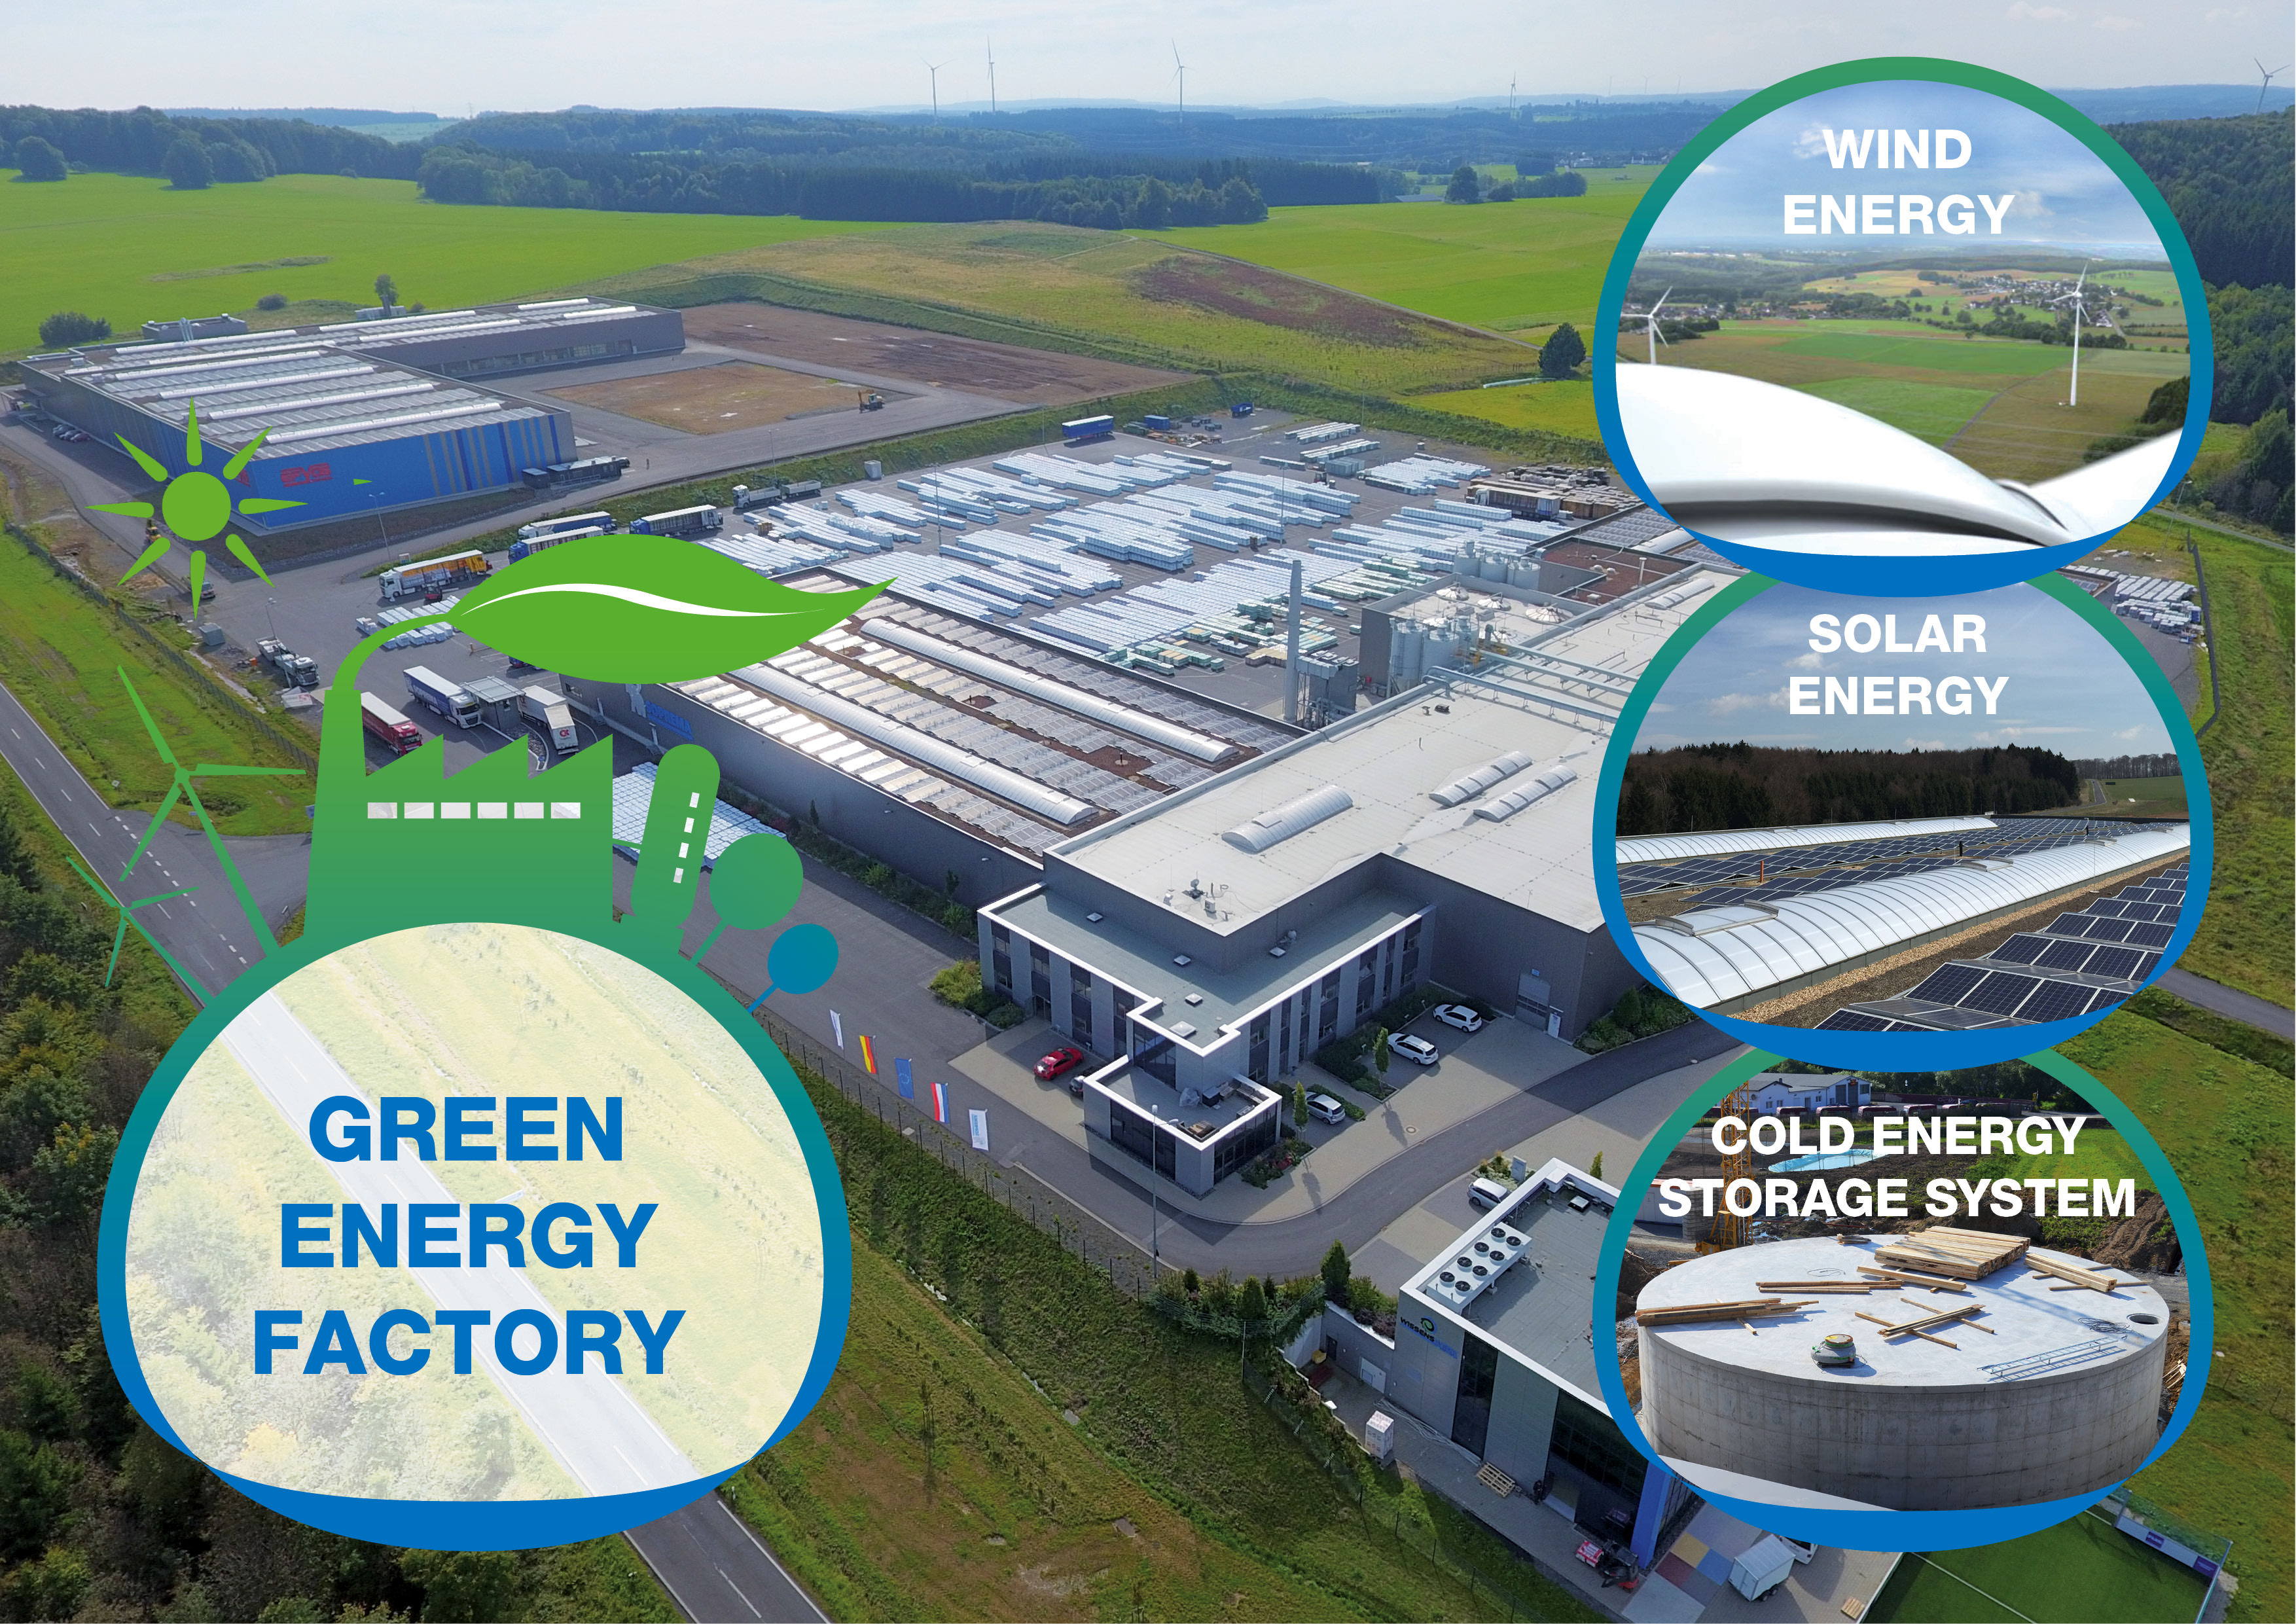 Gallery Cool Green Energy Factory 3